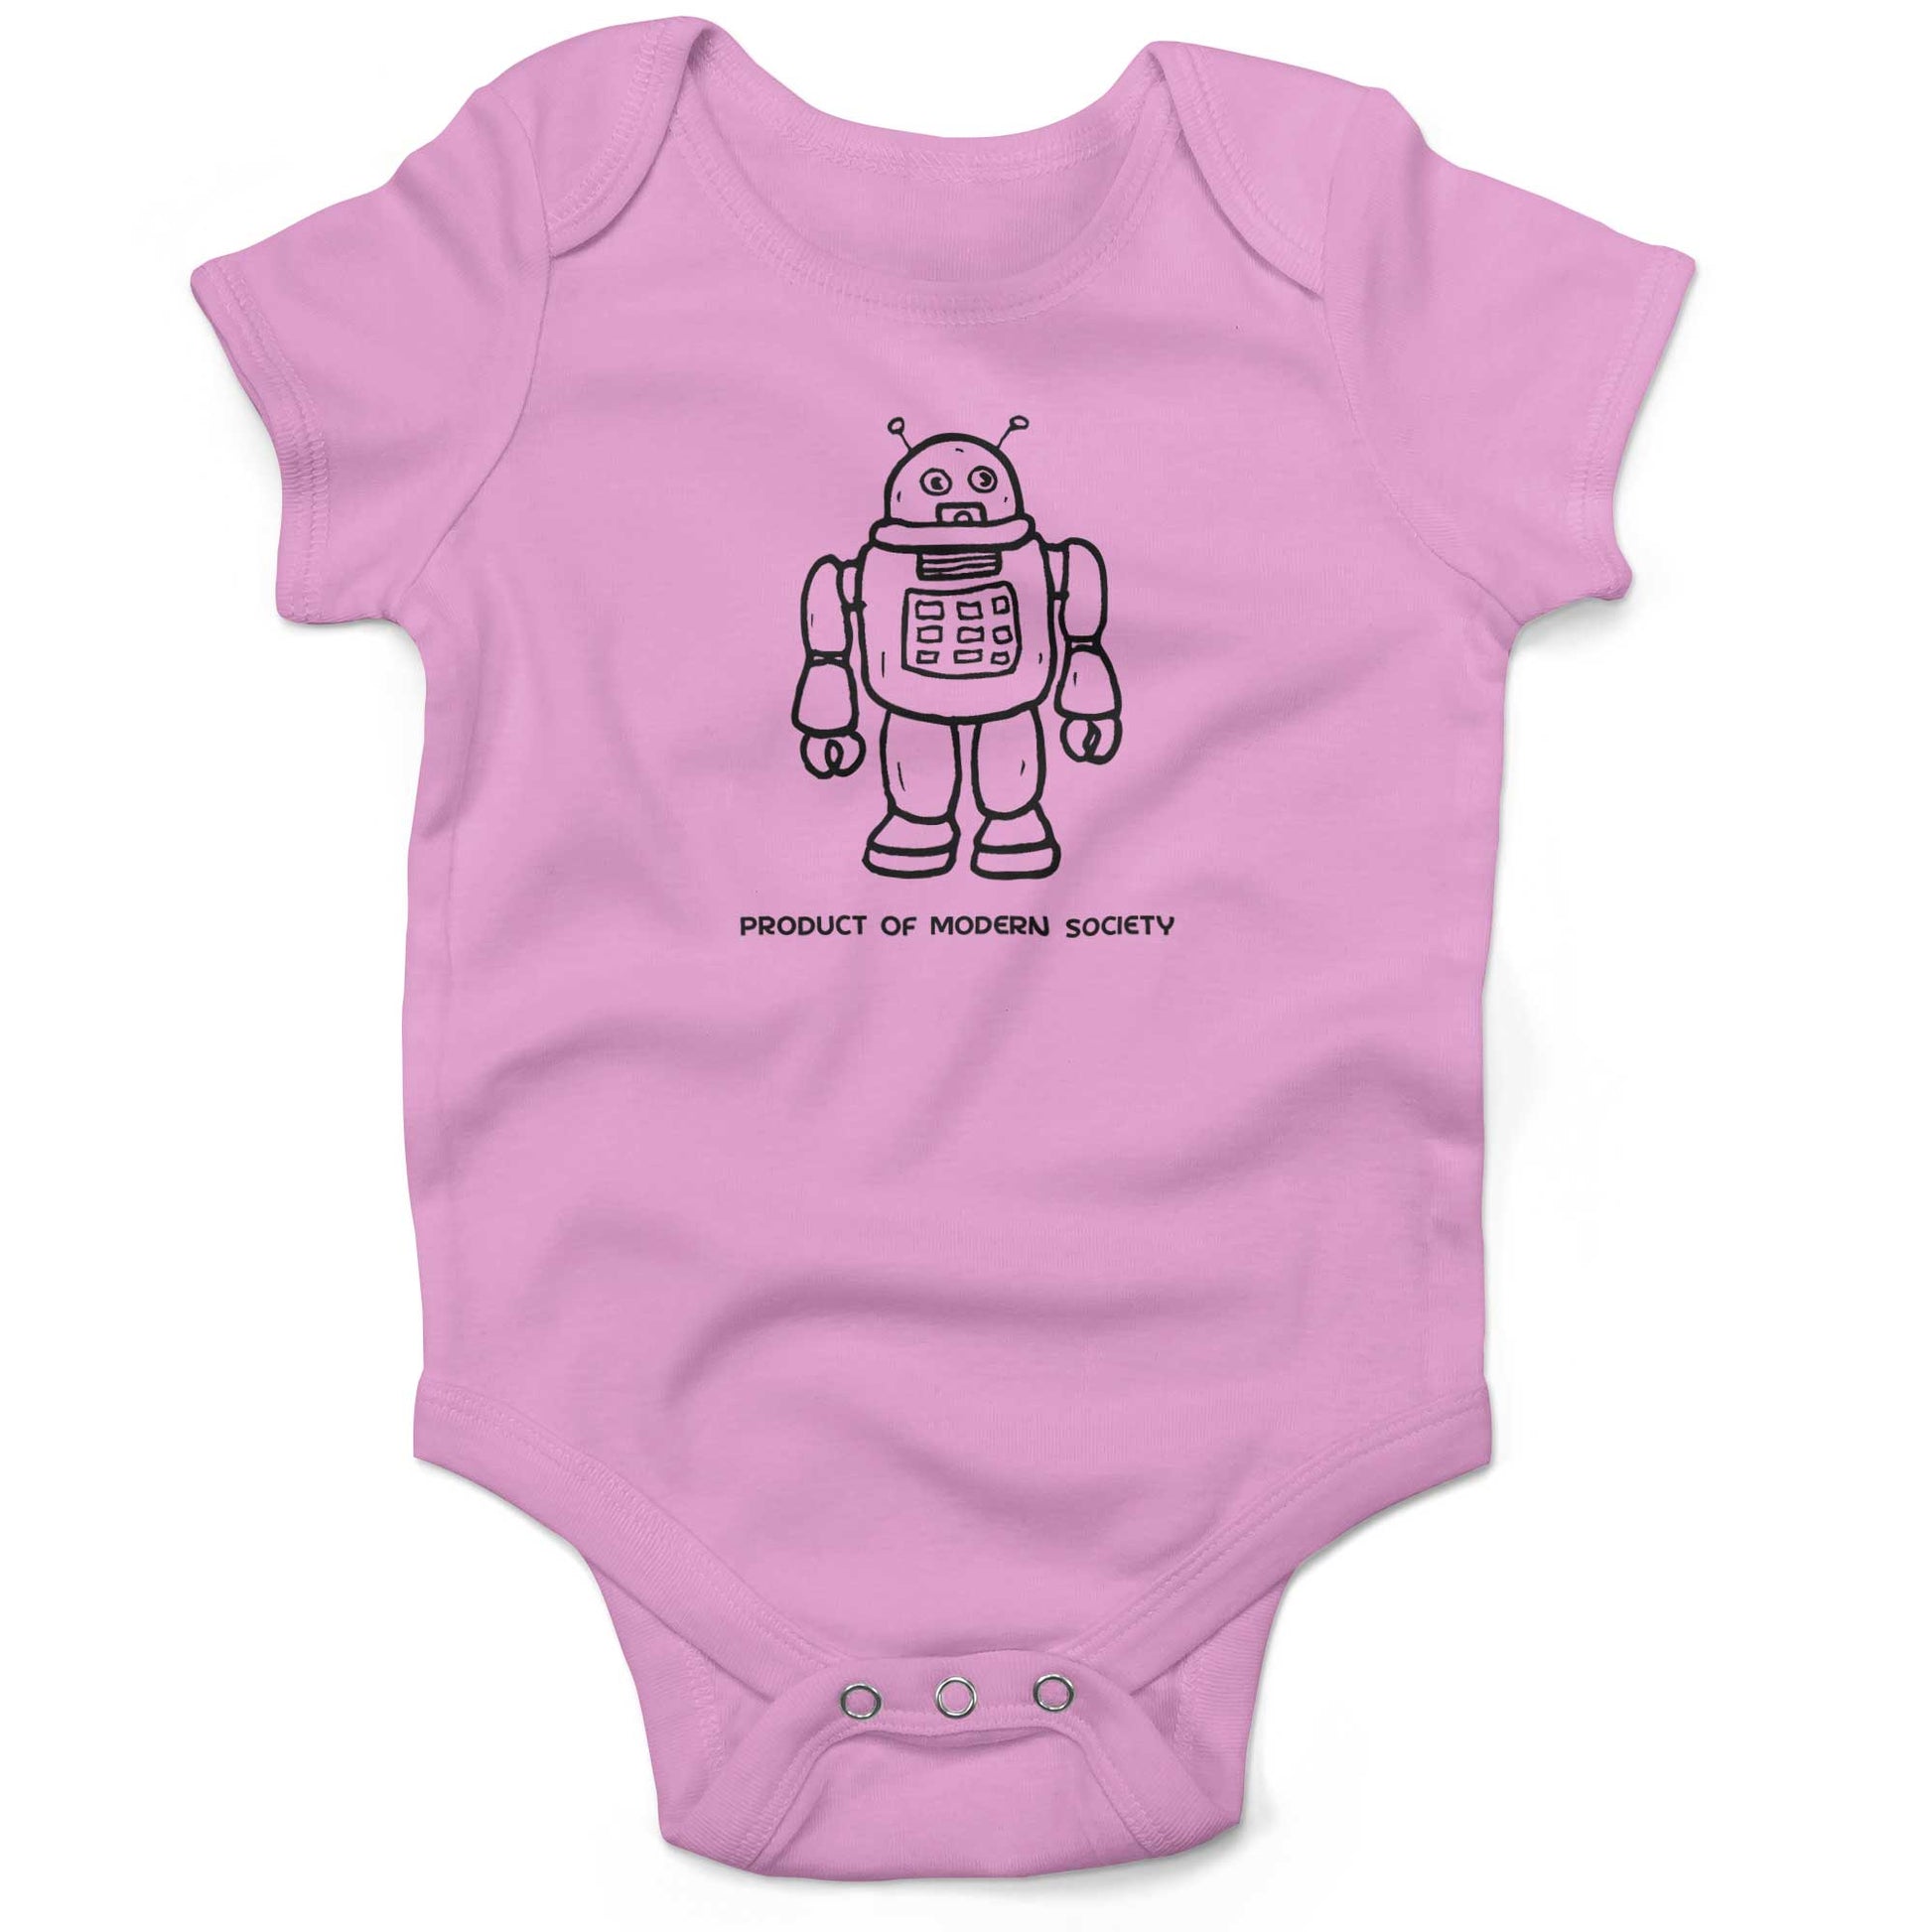 Product Of Modern Society Infant Bodysuit-Organic Pink-3-6 months